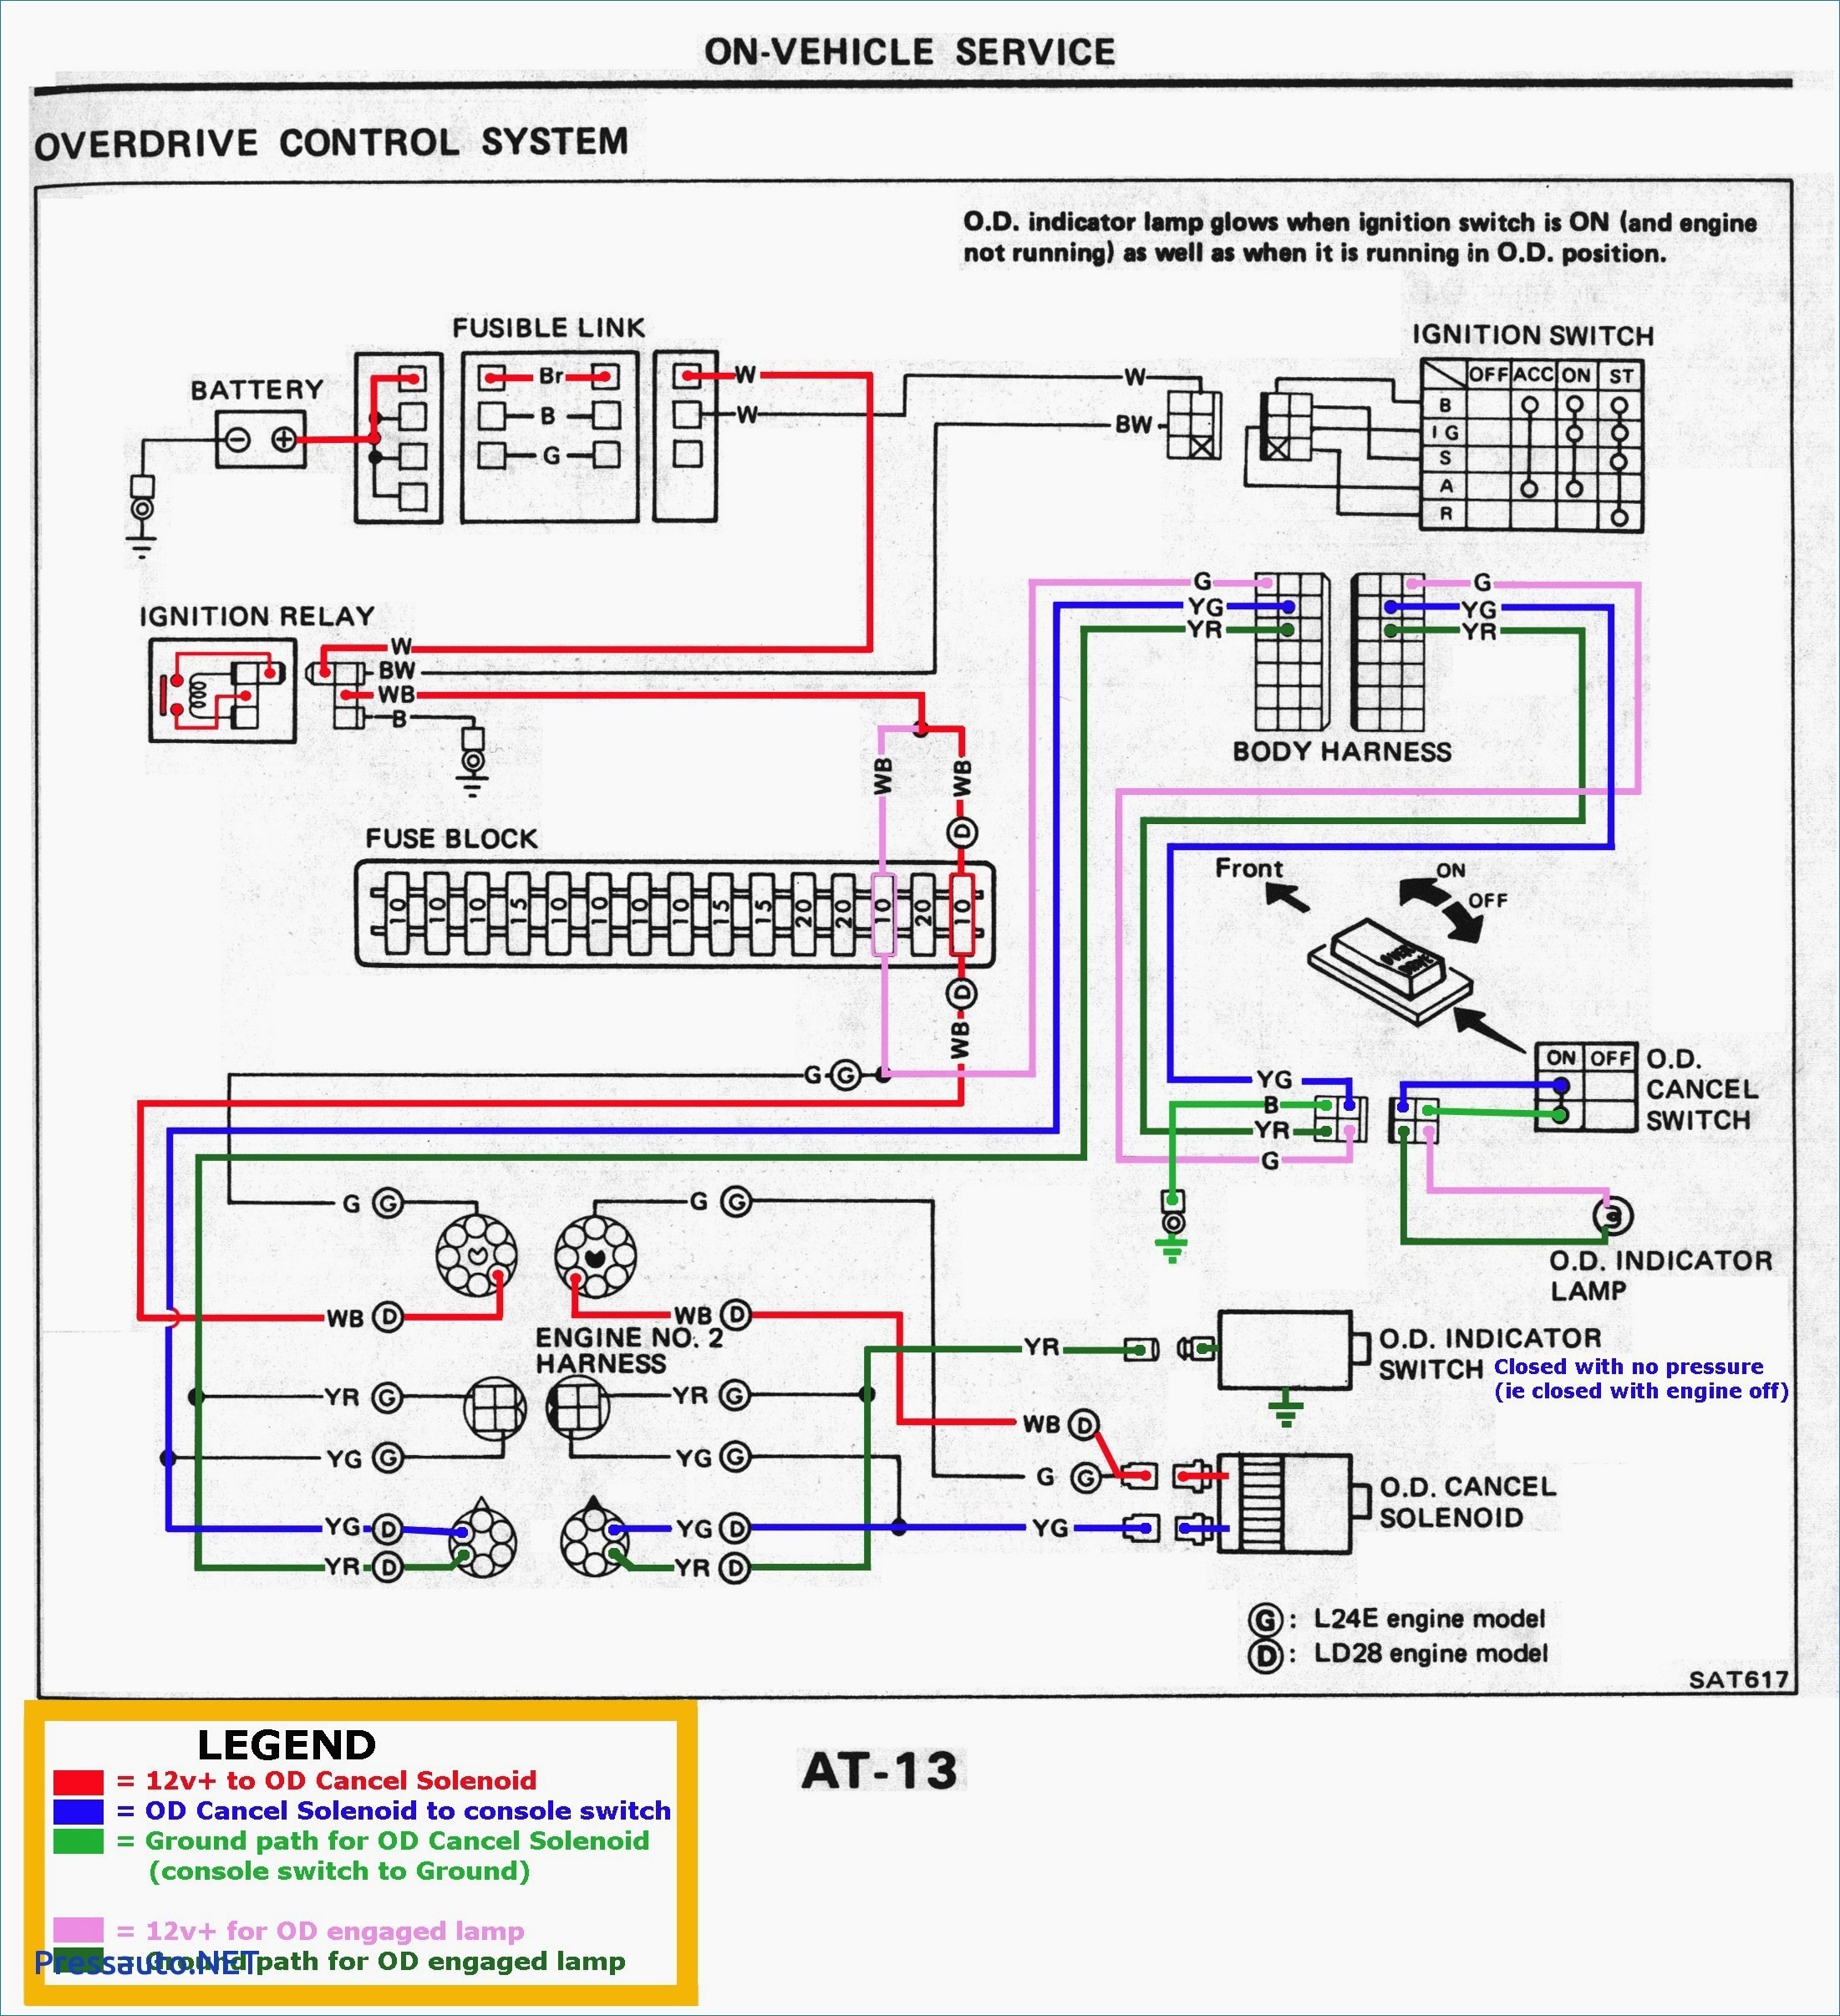 Spitronics Engine  handing out Wiring Diagram | My Wiring